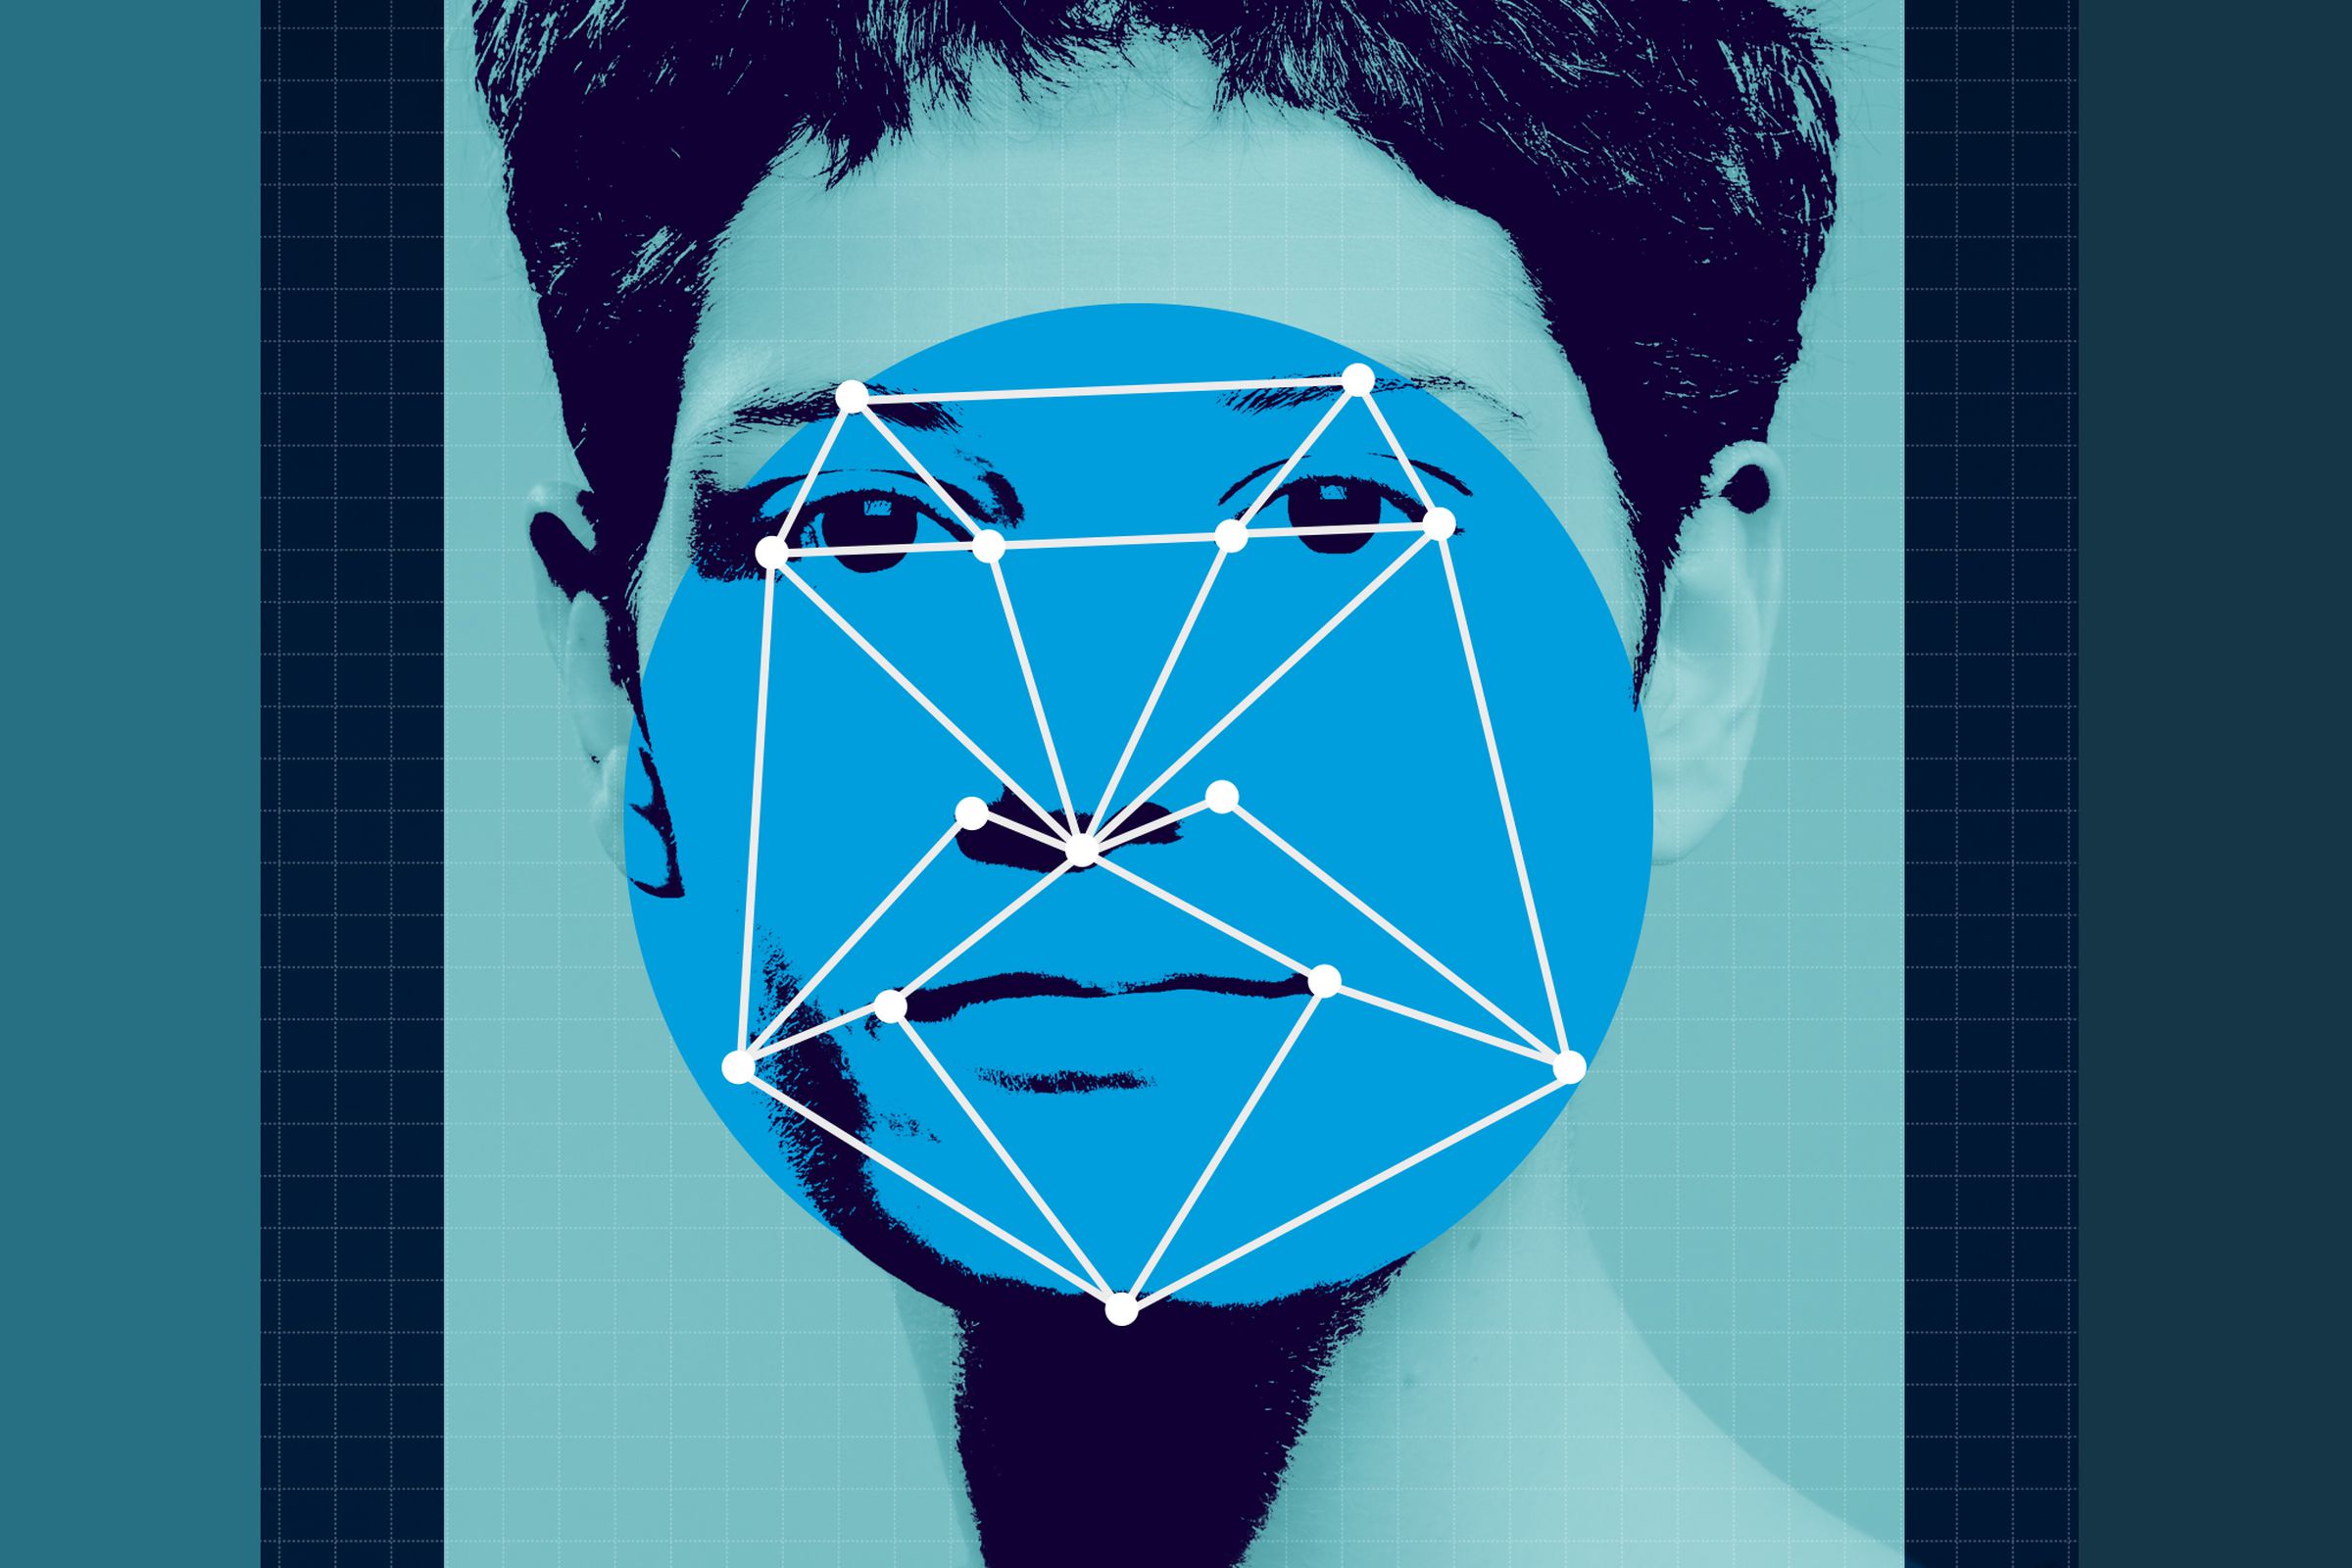 Orlando Police Ditch Amazons Facial Recognition Platform A Second Time